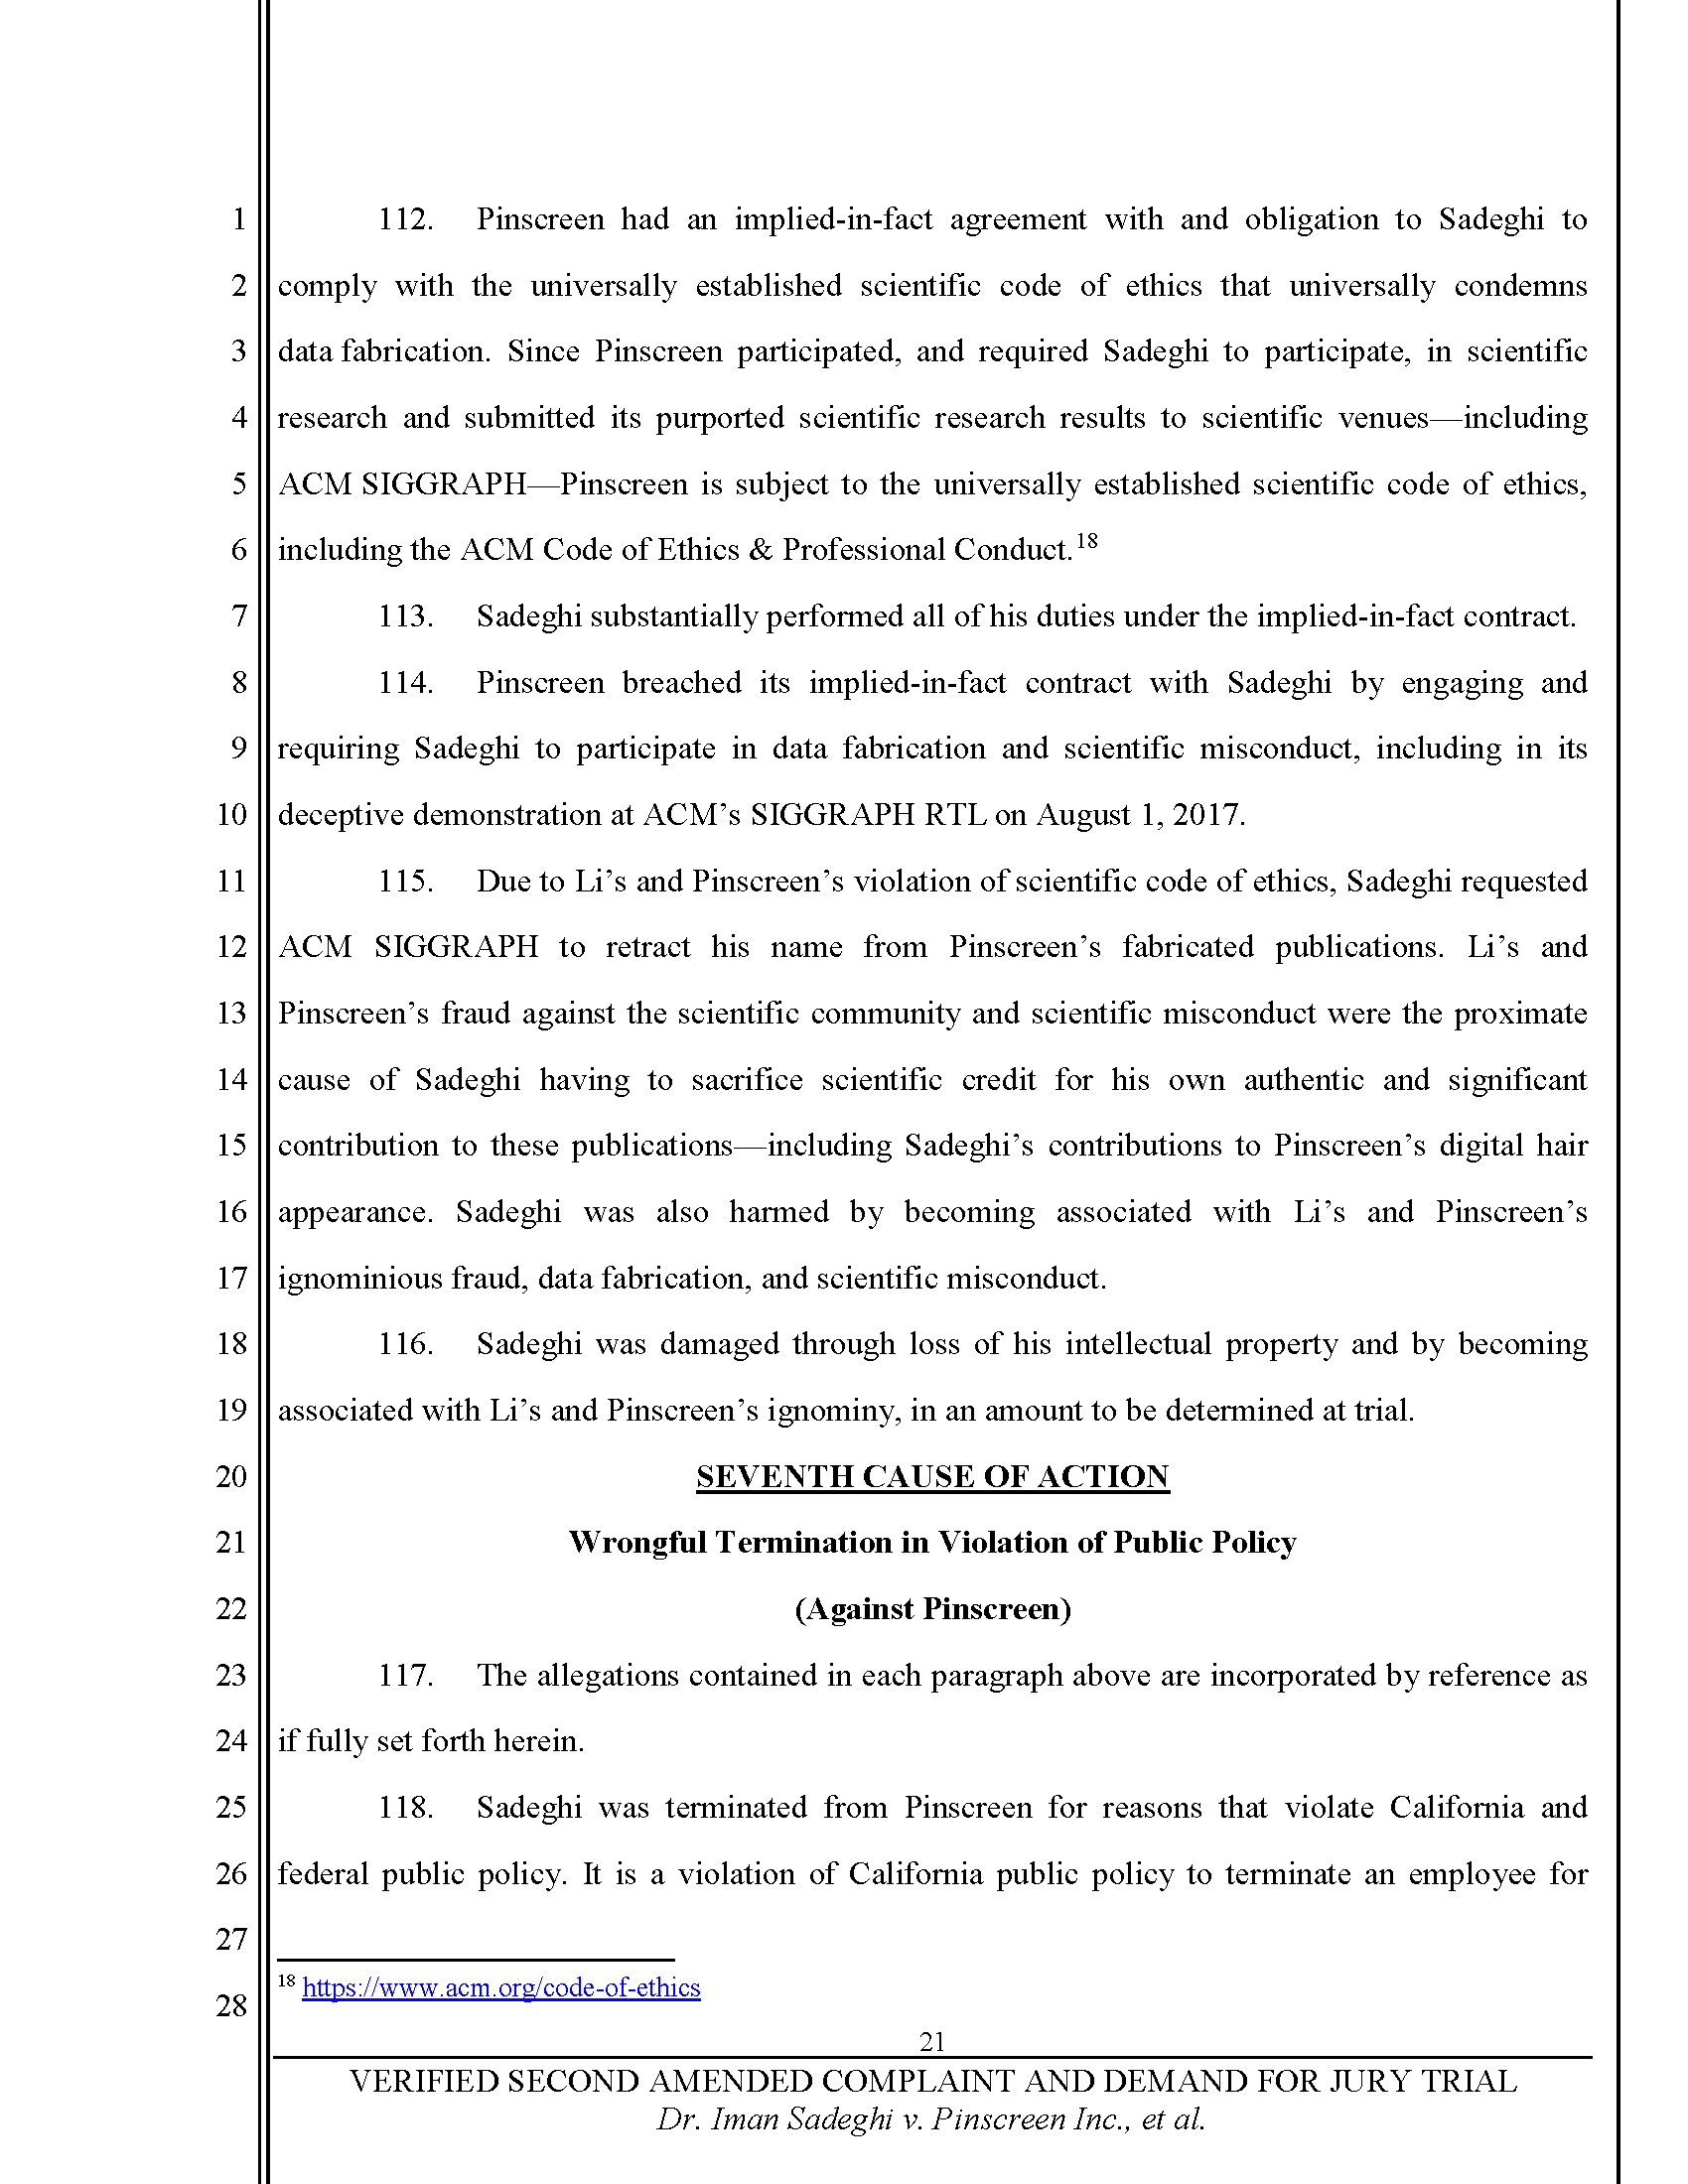 Second Amended Complaint (SAC) Page 22